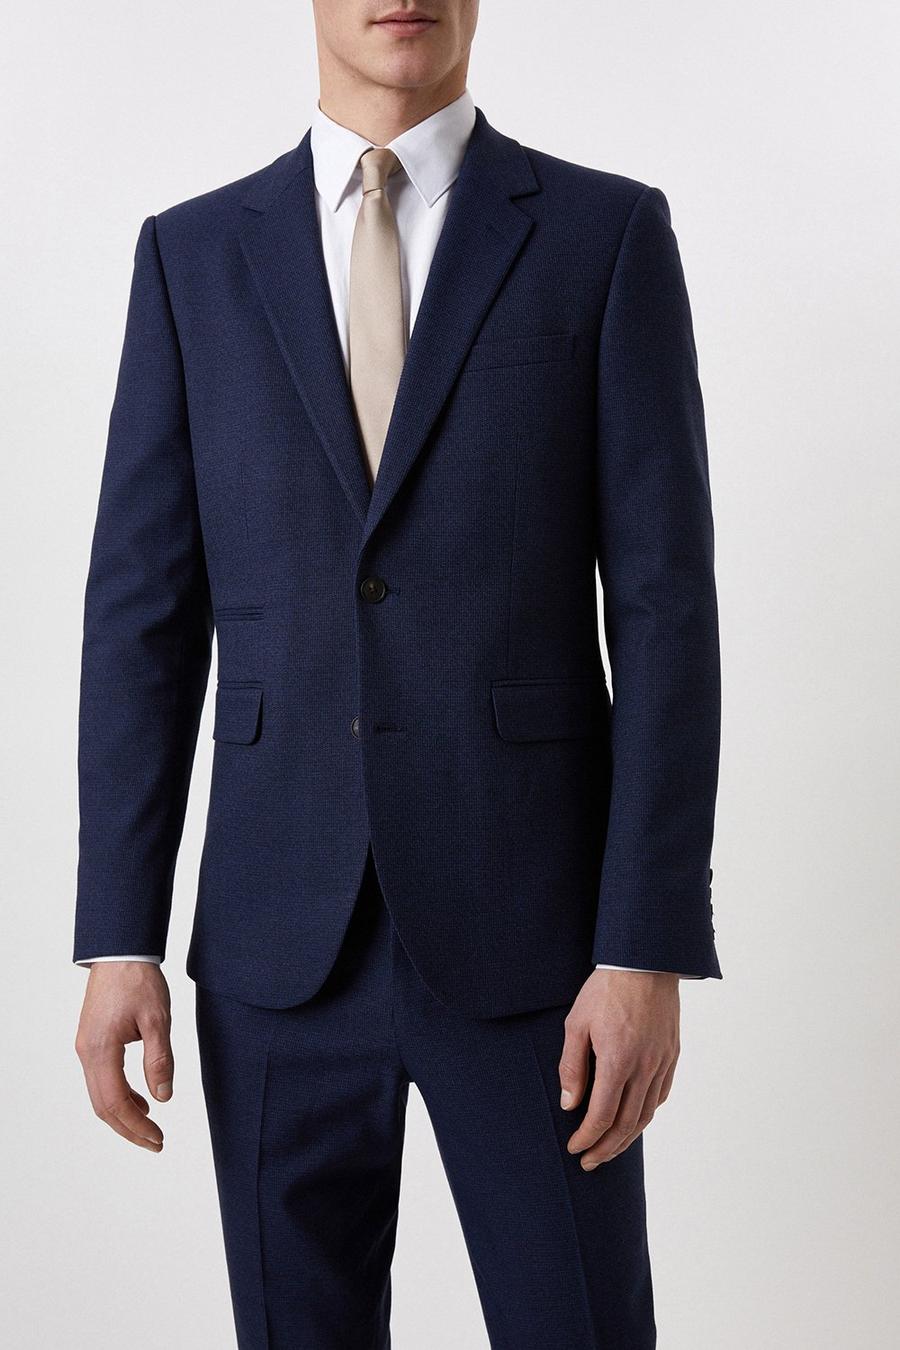 Plus And Tall Slim Fit Navy Marl Suit Jacket